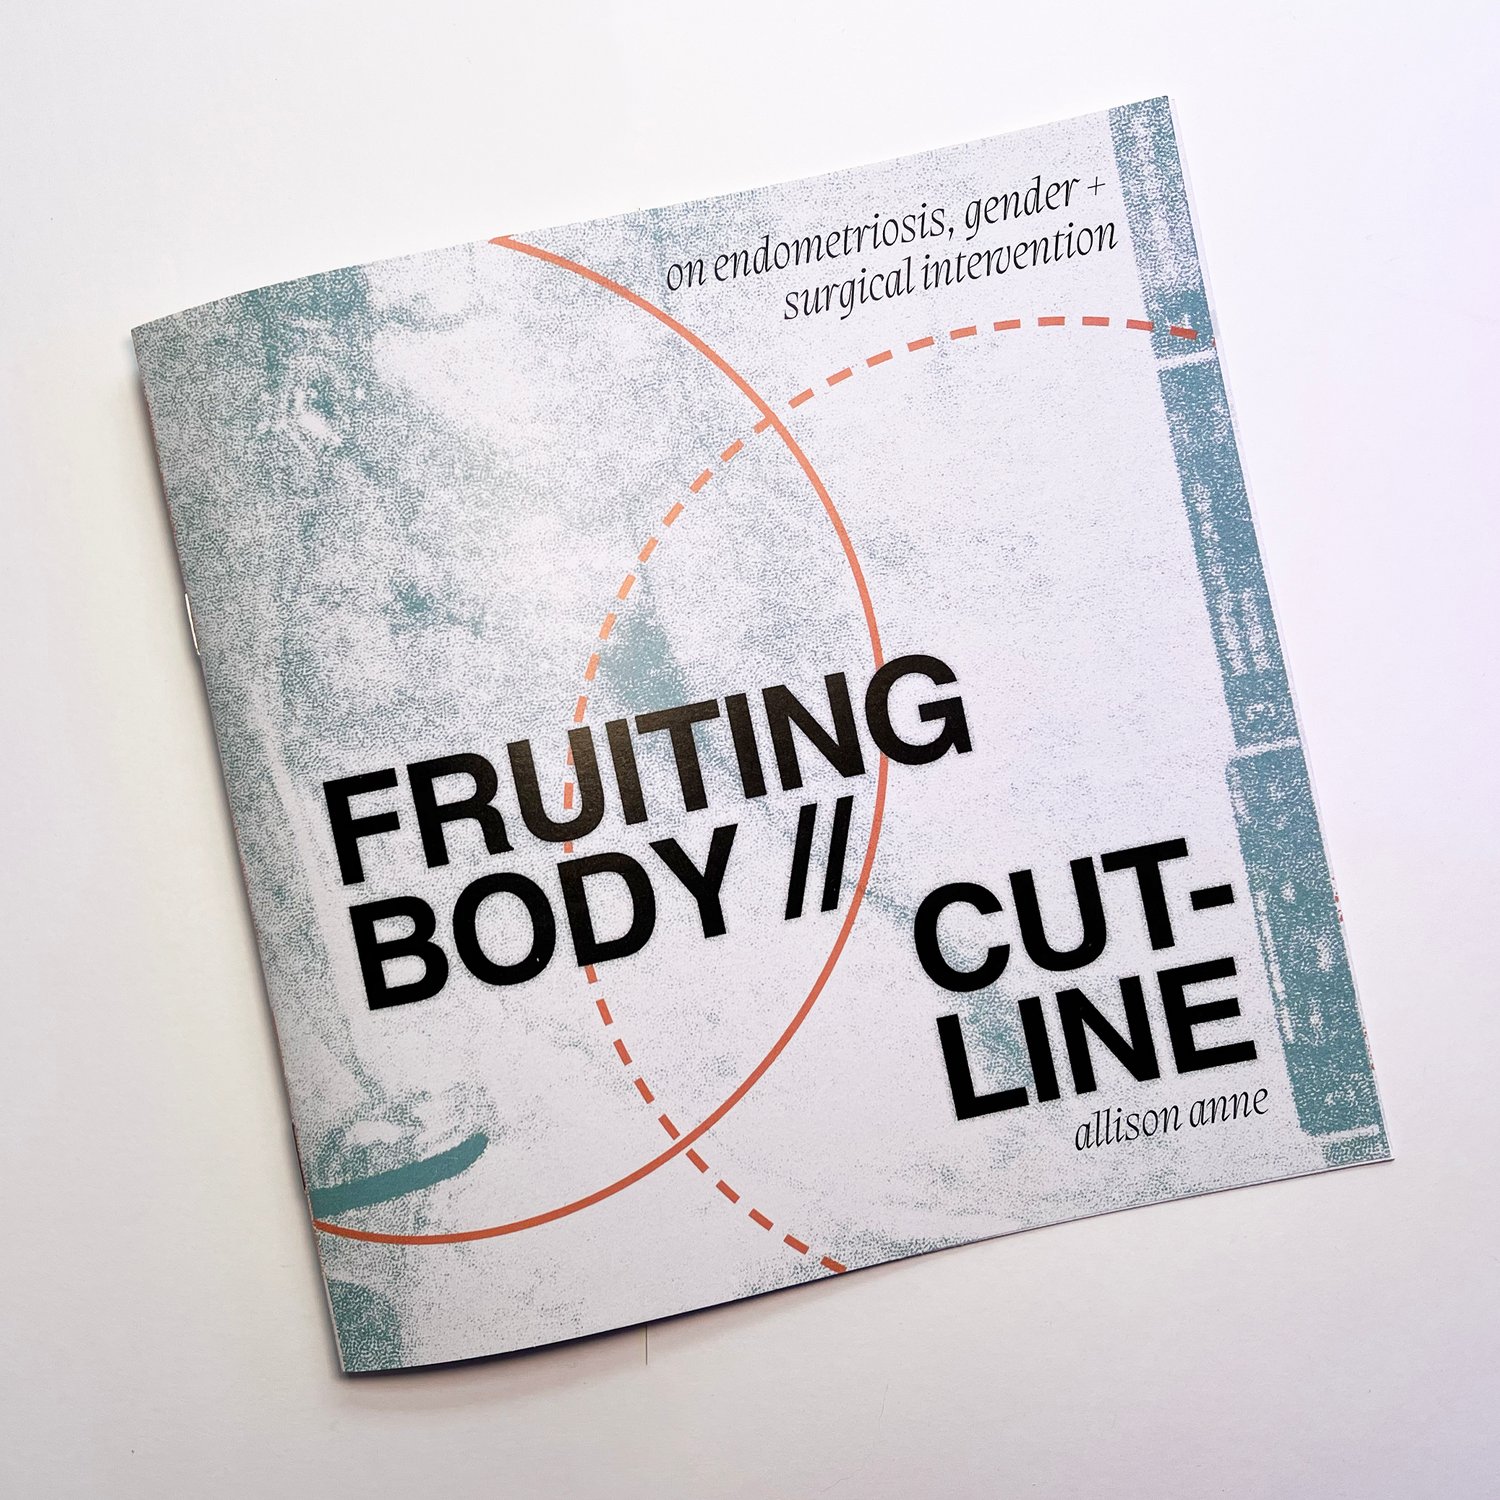 FRUITING BODY // CUT-LINE [on endometriosis, gender + surgical intervention]